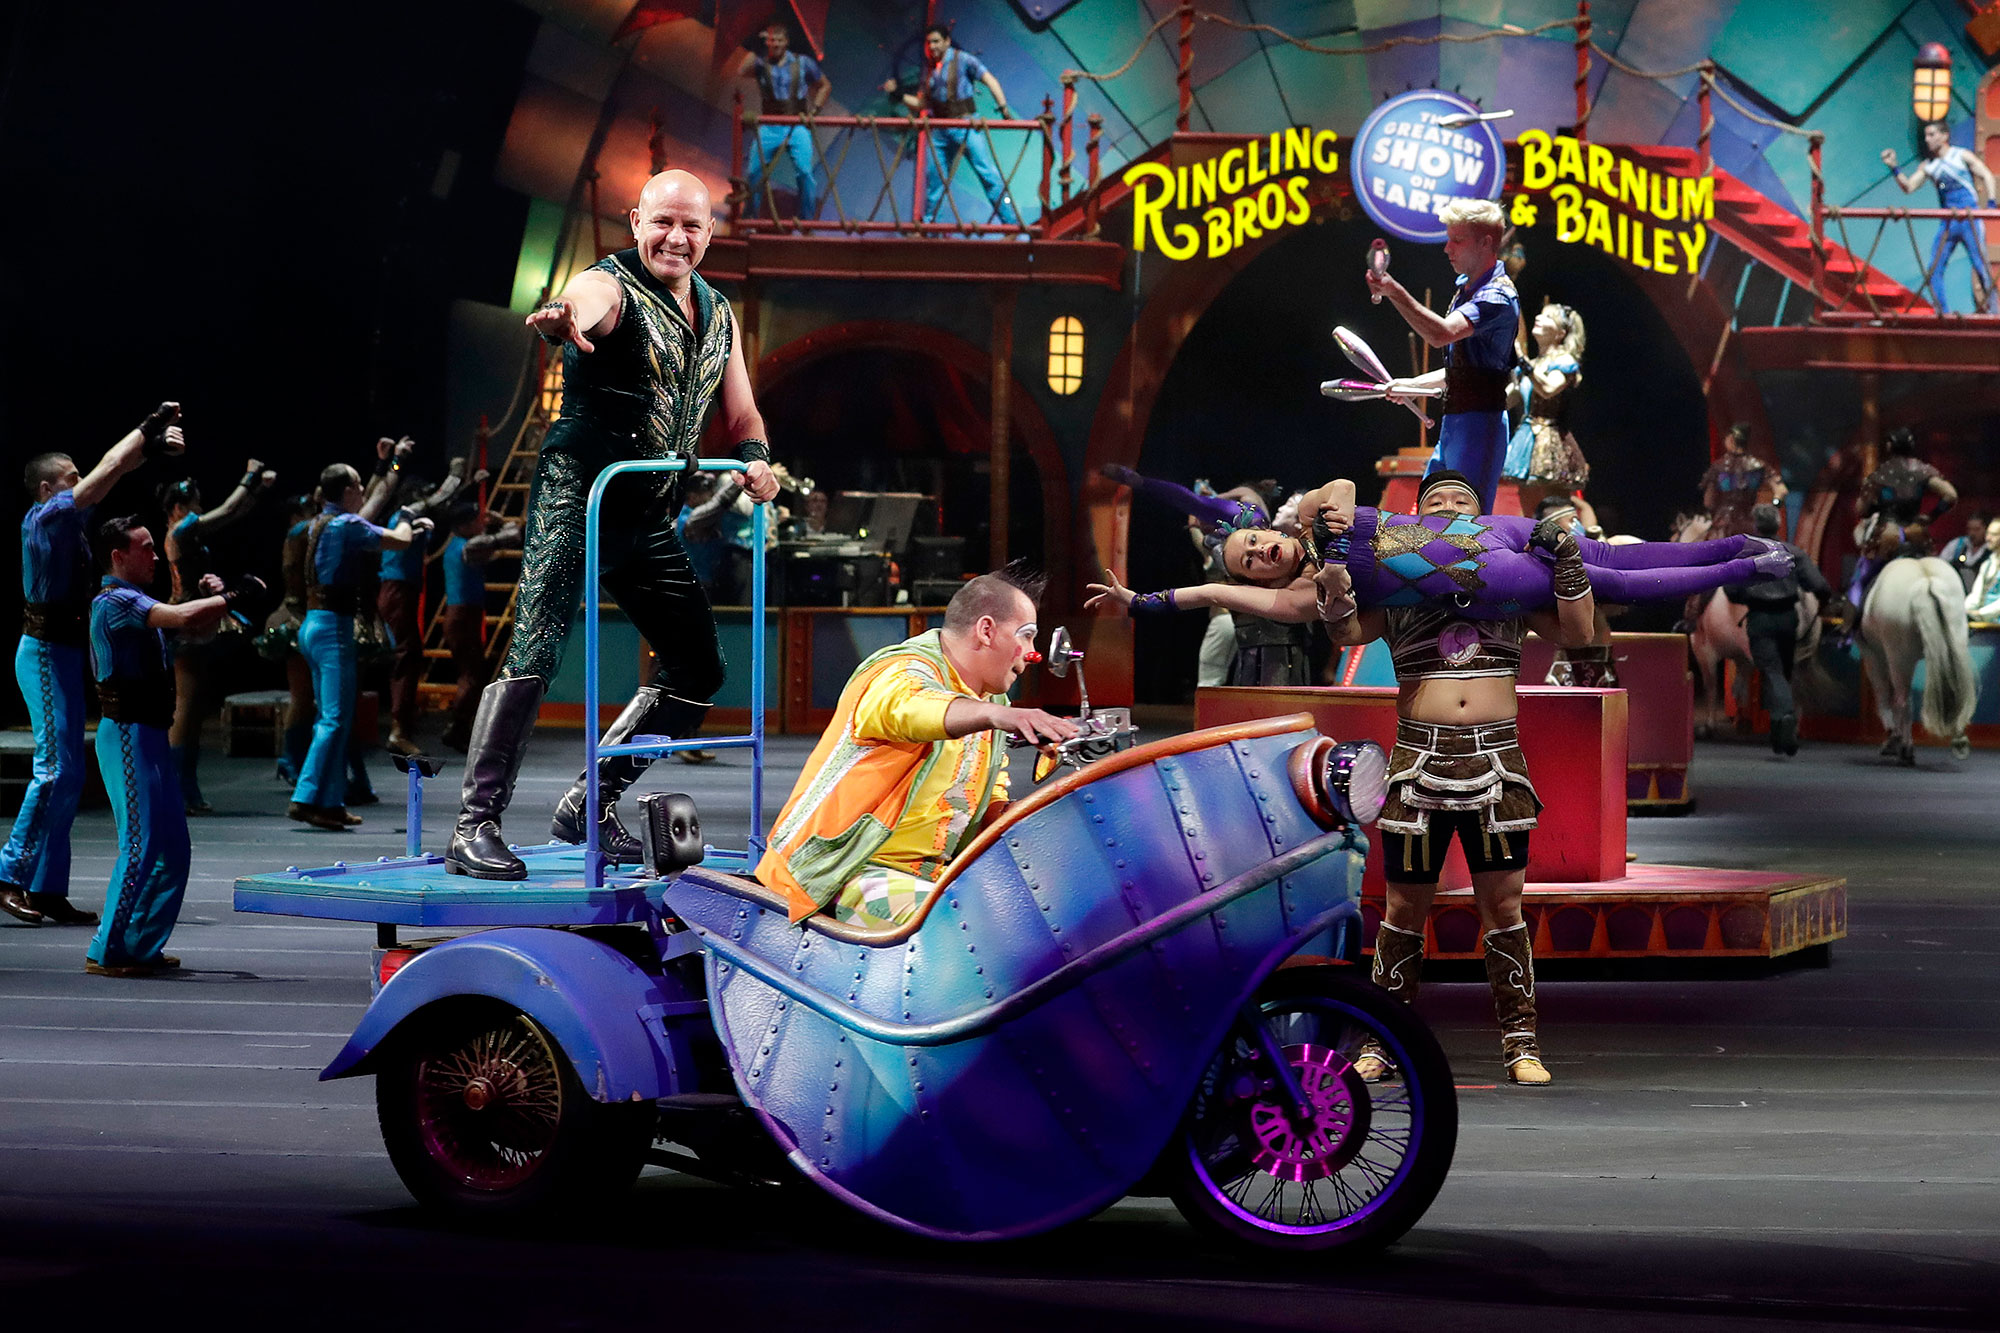 Ringling Bros. and Barnum & Bailey Circus to Return in 2023 with